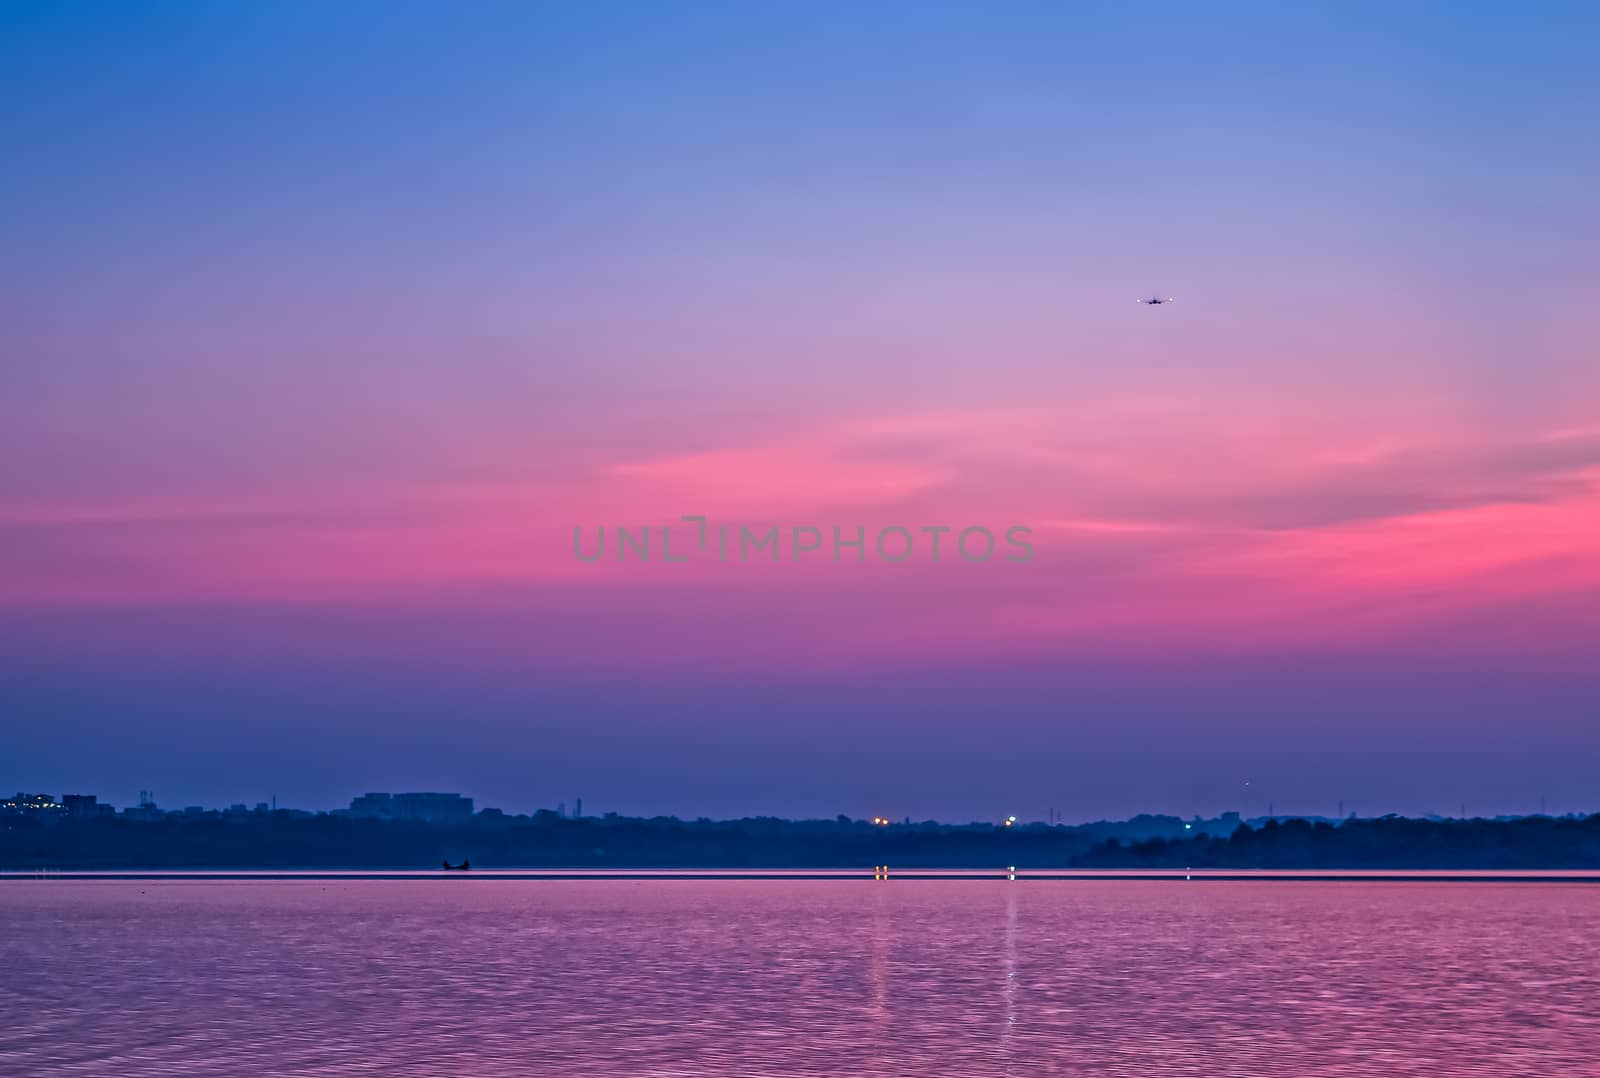 An aircraft approaching airport glides over Ambazari lake, Nagpur  with a backdrop of Sunset on a beautiful evening.Can be used as wallpaper. by lalam